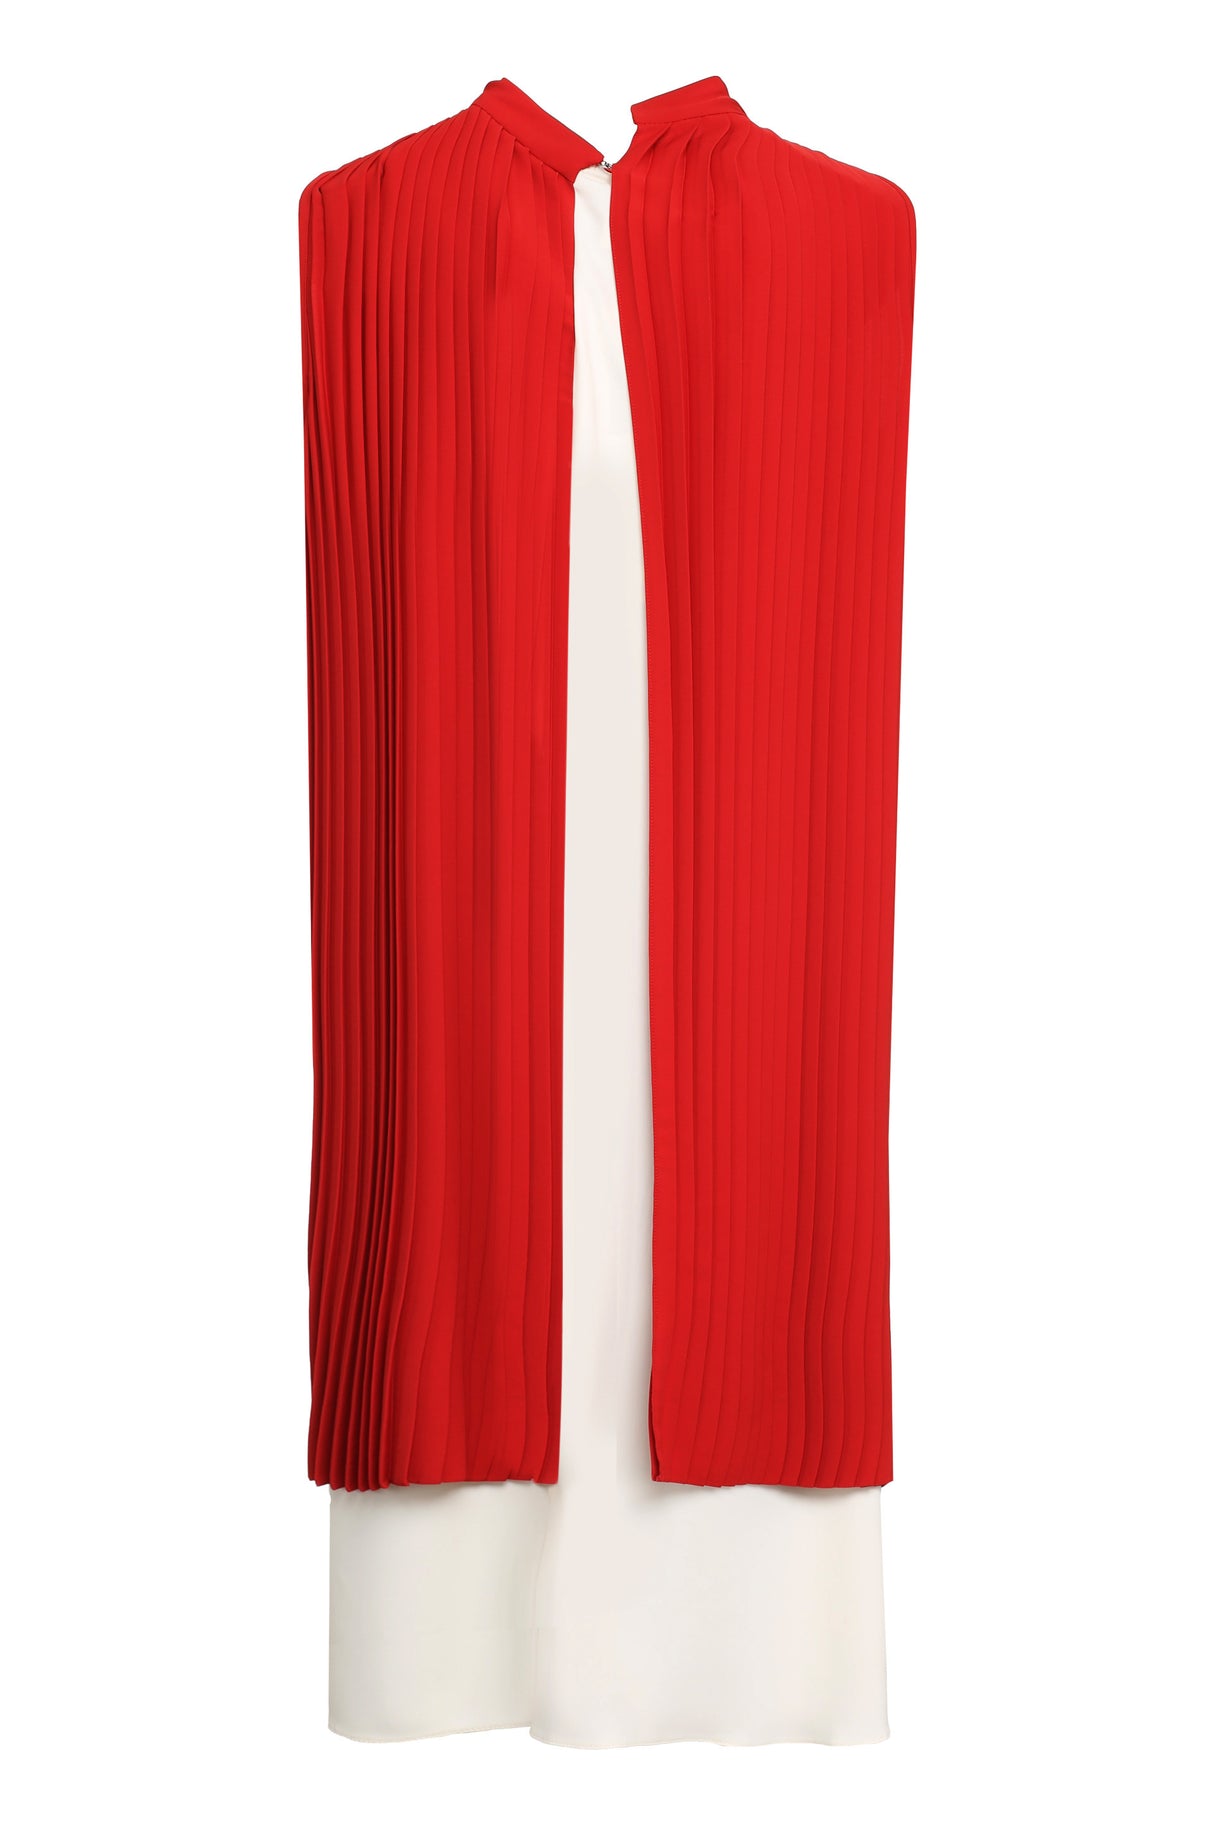 MM6 MAISON MARGIELA Red Pleated Layered Dress with Bow Fastening for Women